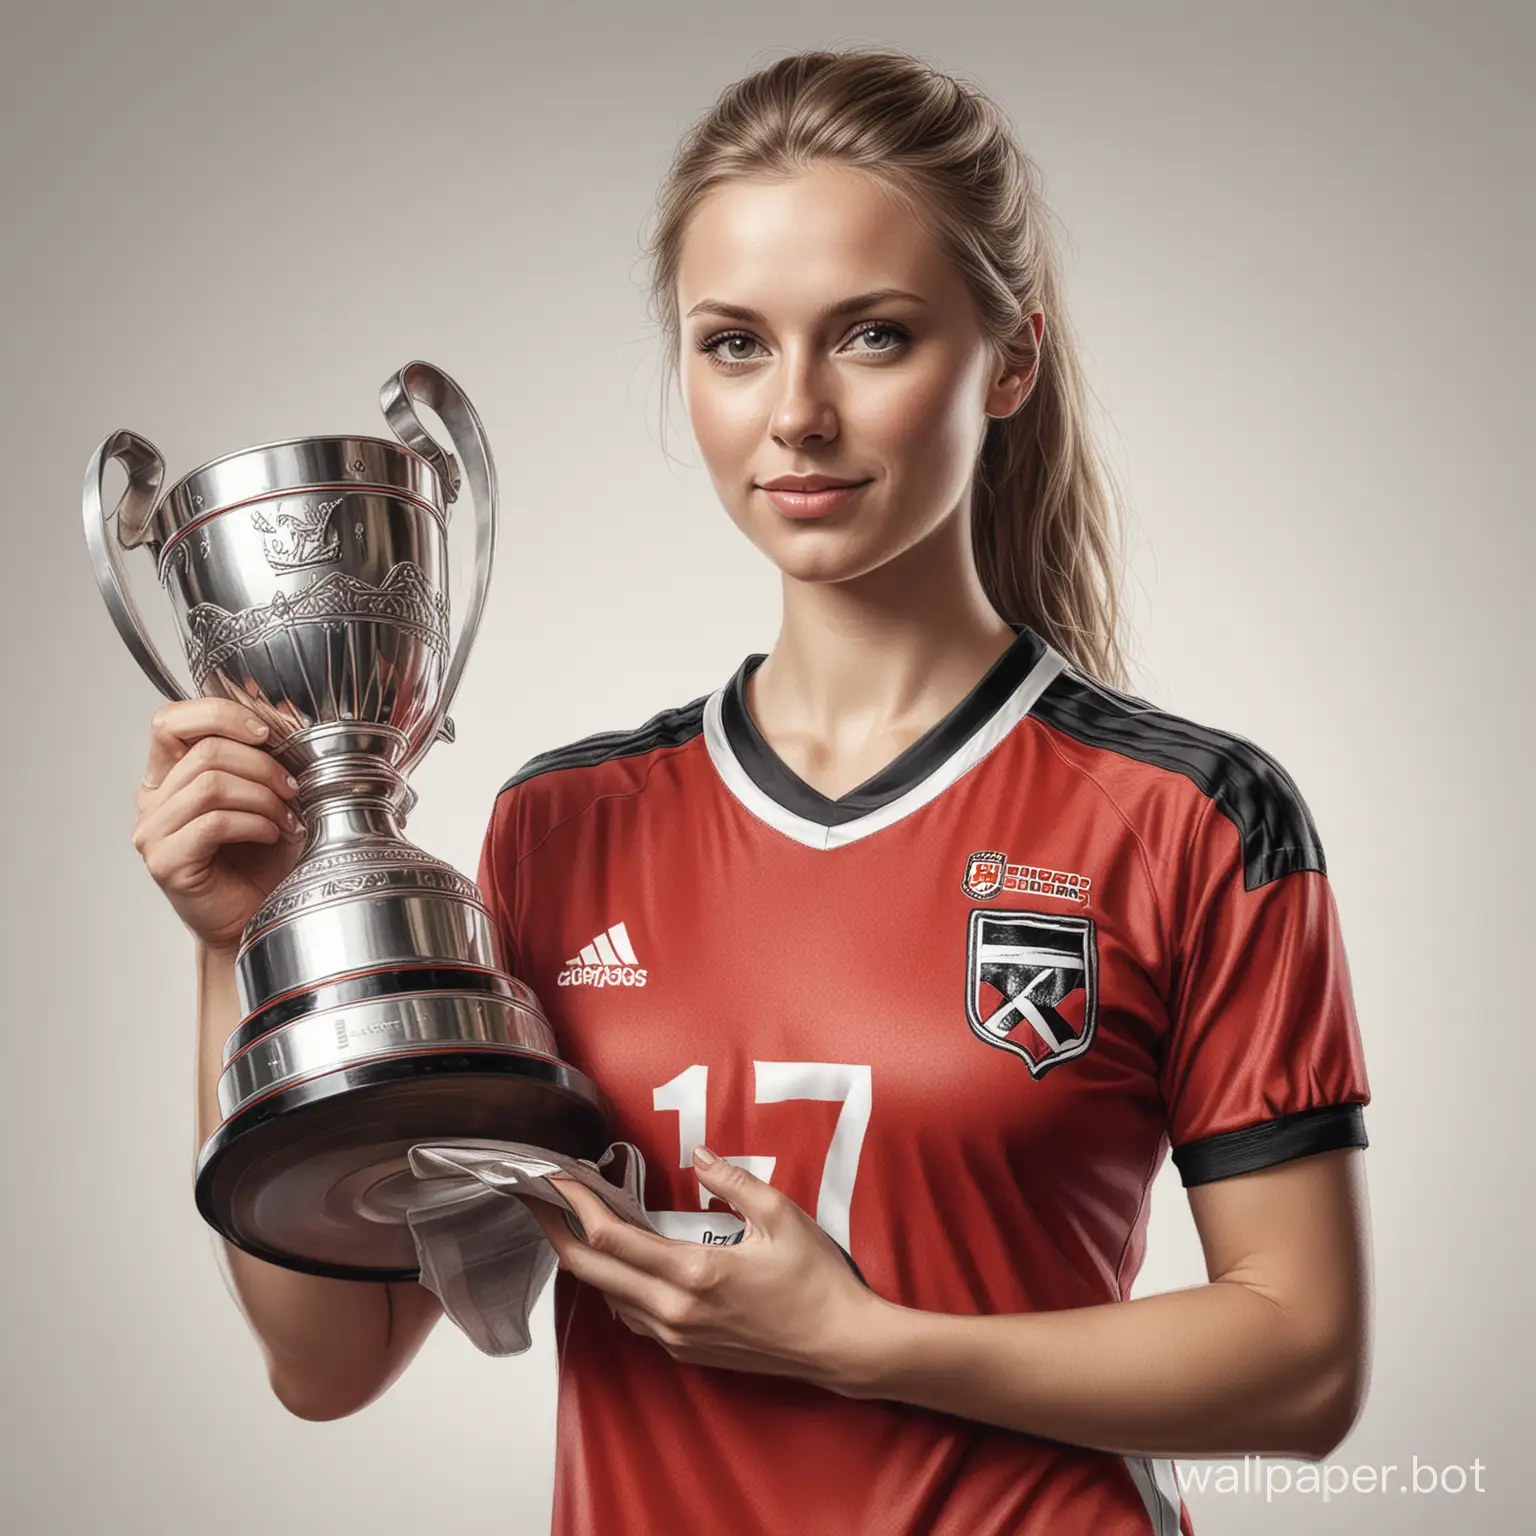 Sketch of a young Danish woman size 6 breasts narrow waist in red and black soccer uniform holding a large champions cup on a white background highly realistic drawing of a colored liner